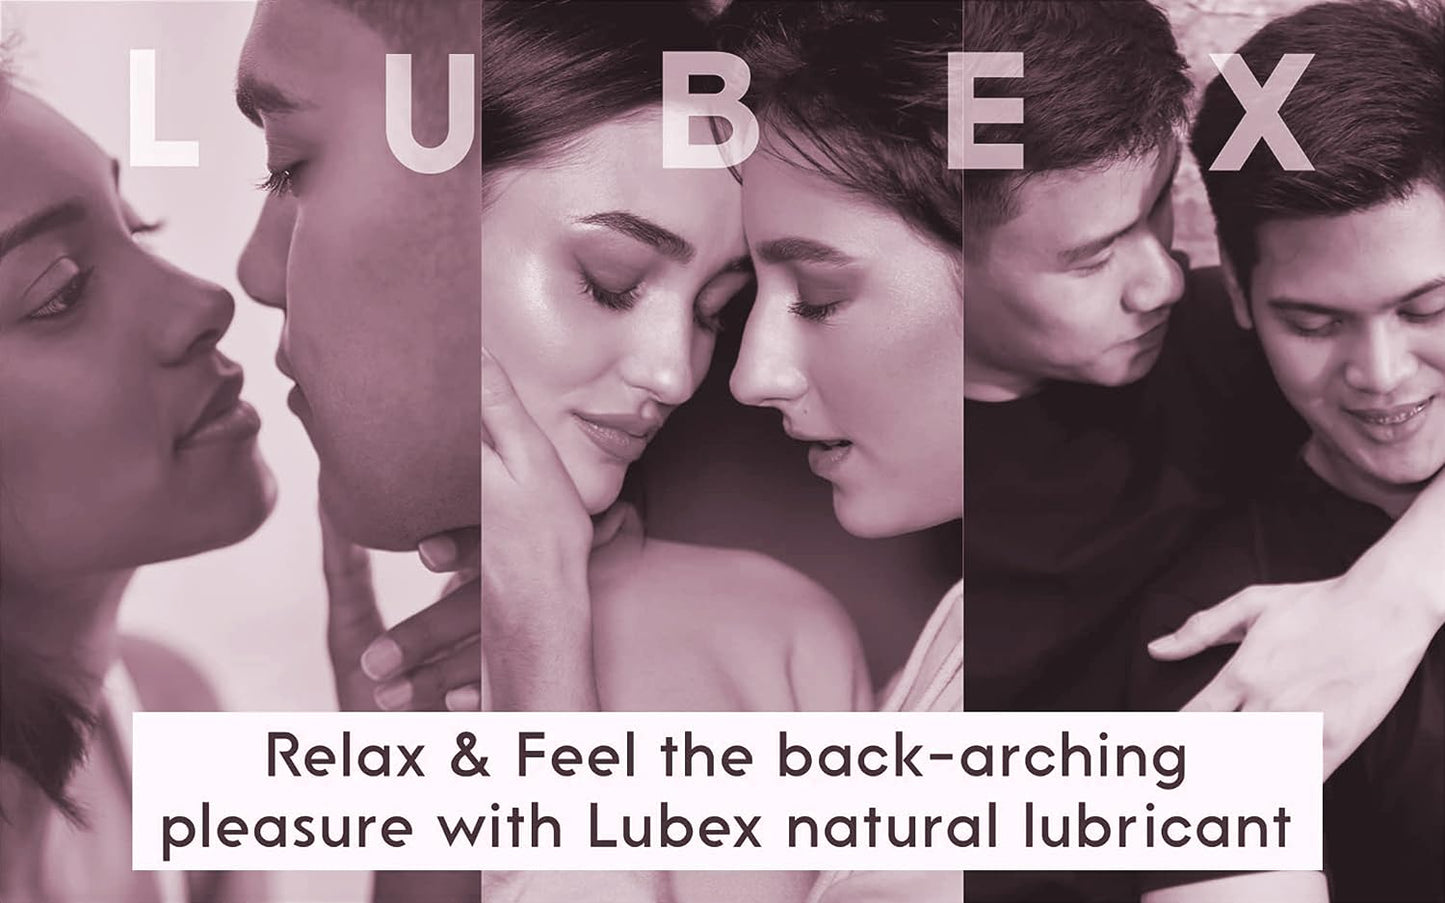 Lubex Lubricant - 100% Natural Long-Lasting Lubricant - Natural Strawberry Flavour